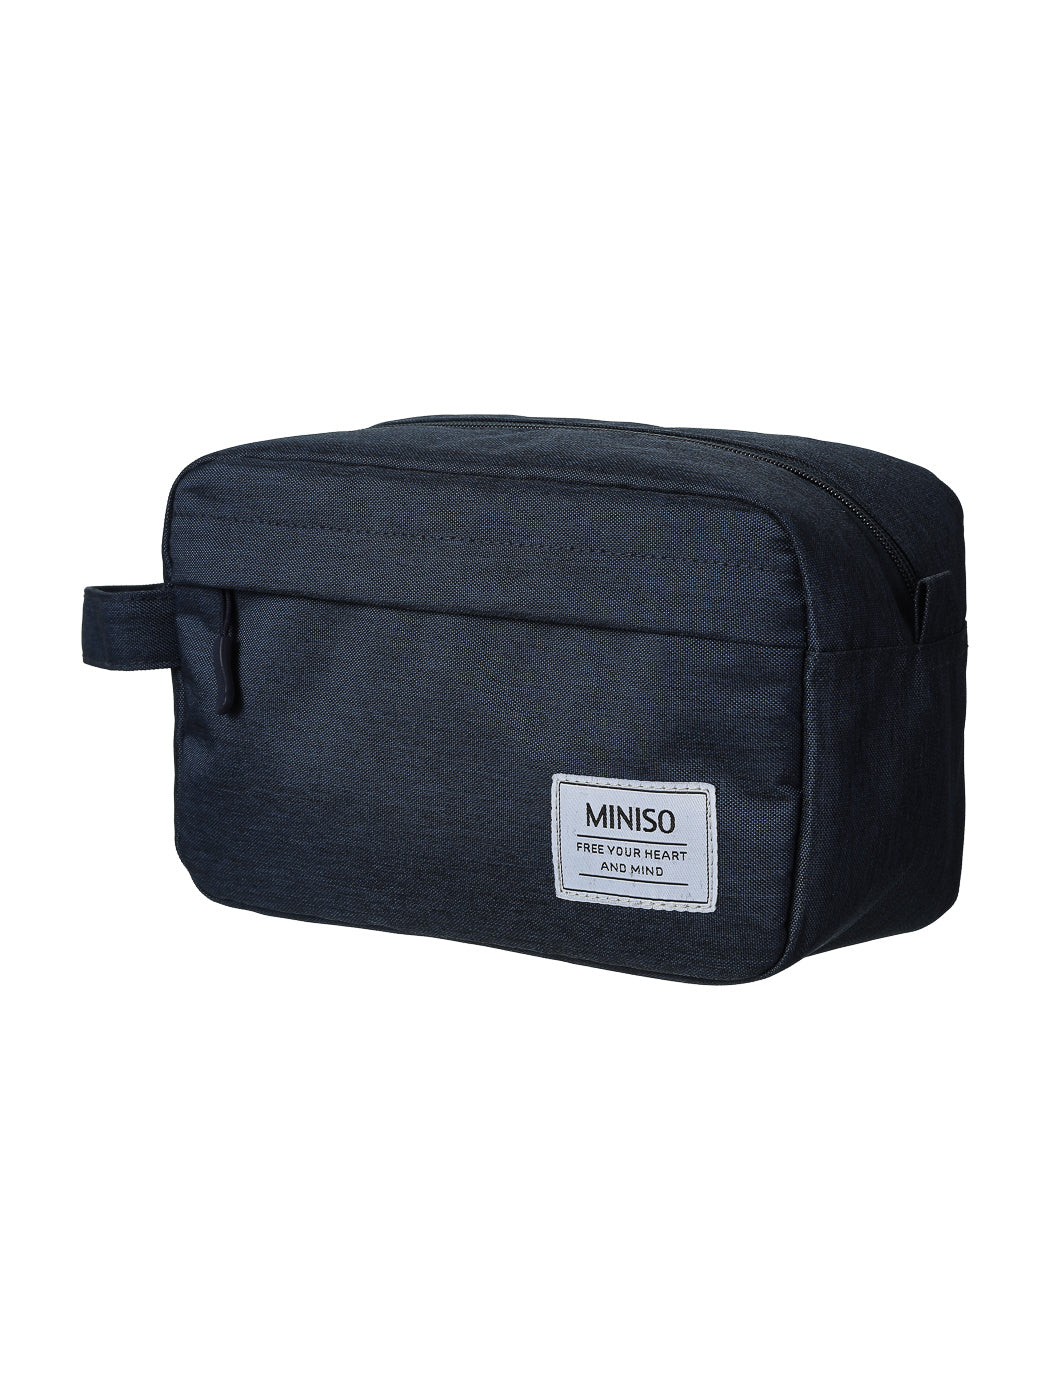 MINISO YOUTH OF THE TIME STORAGE BAG(NAVY BLUE) 2010861010108 TRAVEL STORAGE BAG